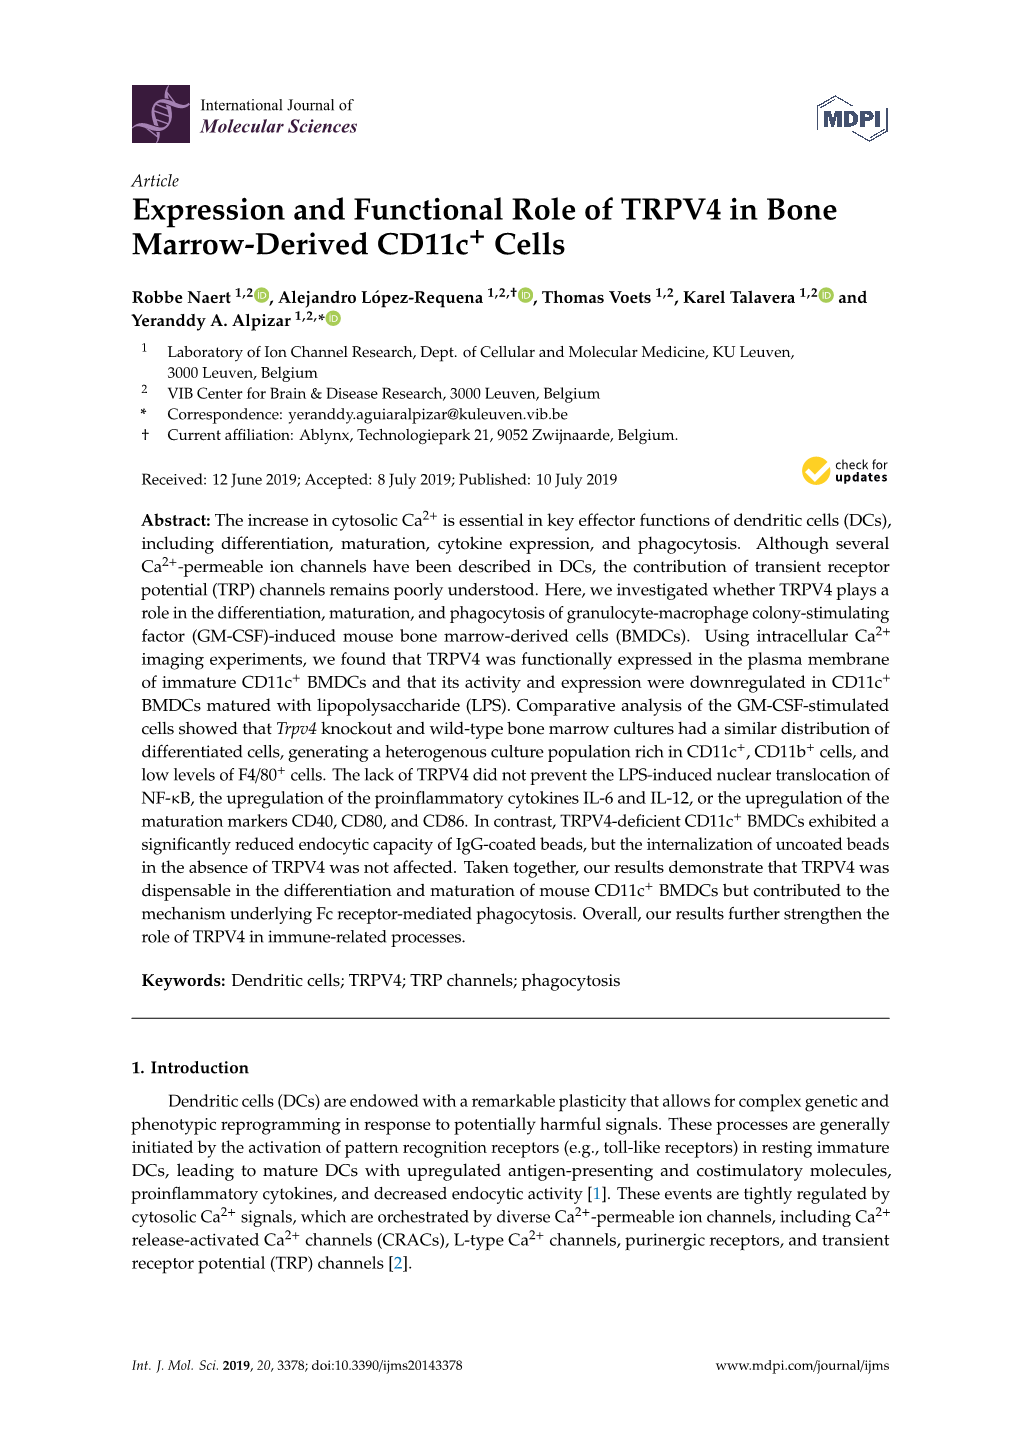 Expression and Functional Role of TRPV4 in Bone Marrow-Derived Cd11c+ Cells